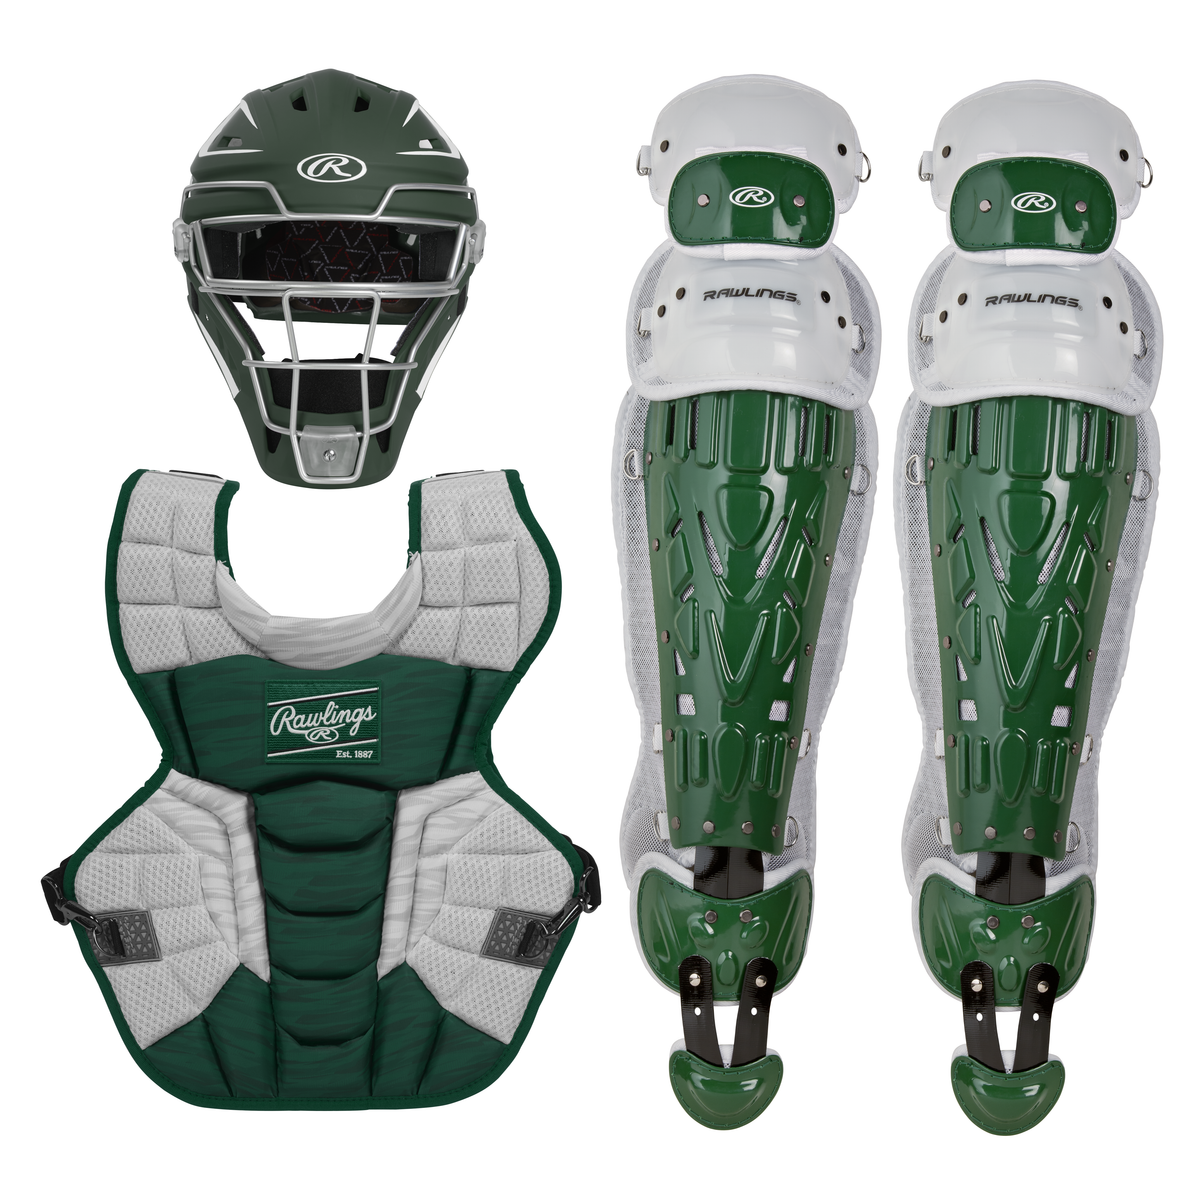 Rawlings Velo 2.0 Catcher's Complete Set - NOCSAE Certified